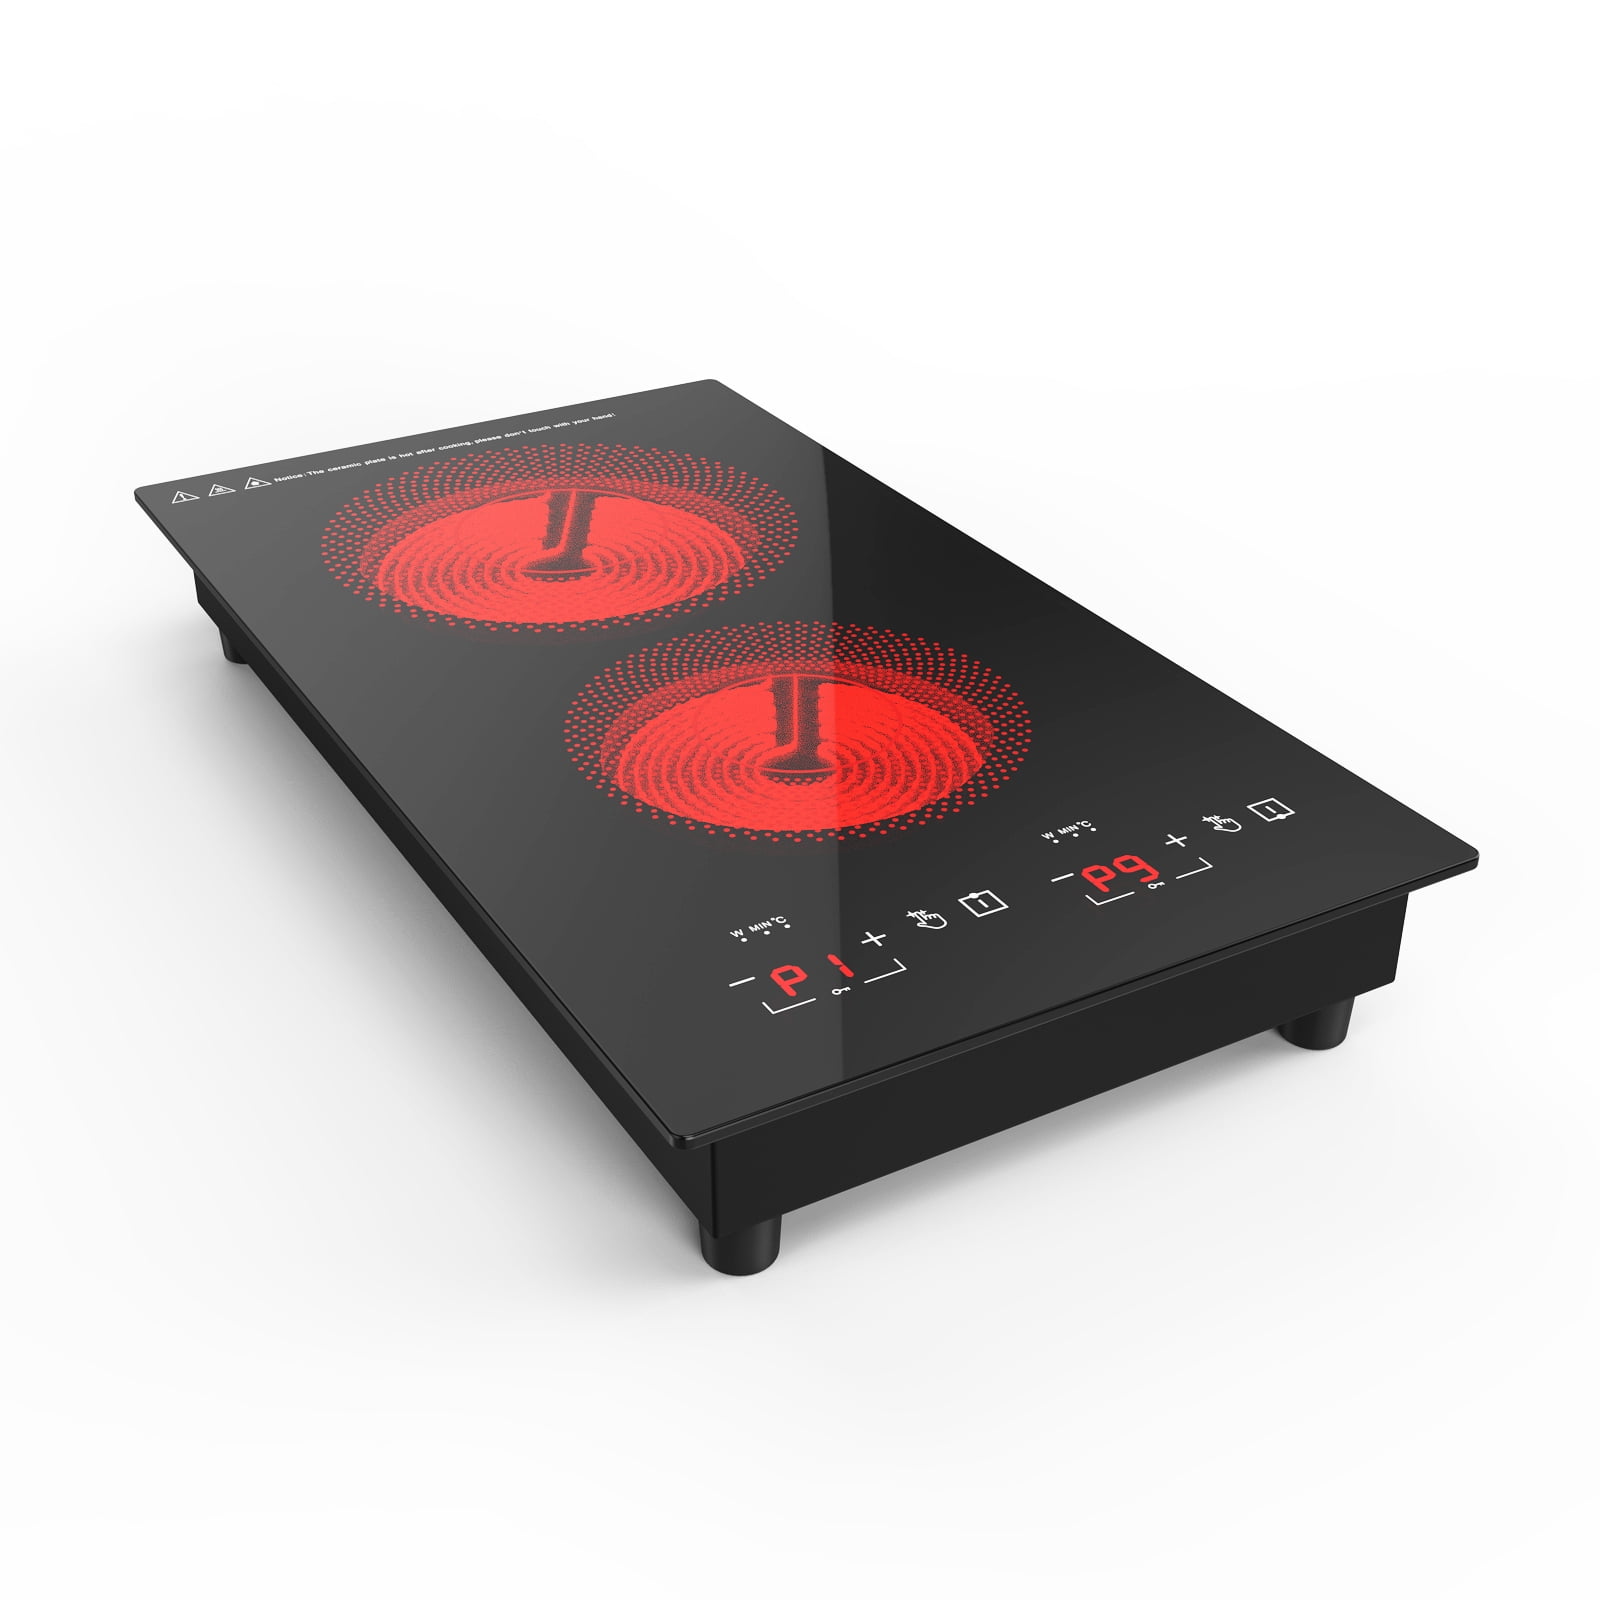 Vbgk Electric Cooktop 2 Burners 2400W Portable Electric Burner Countertop Hot Plate for Cooking 120v,3h Timer & Auto Shutdown Electric Stove,Child